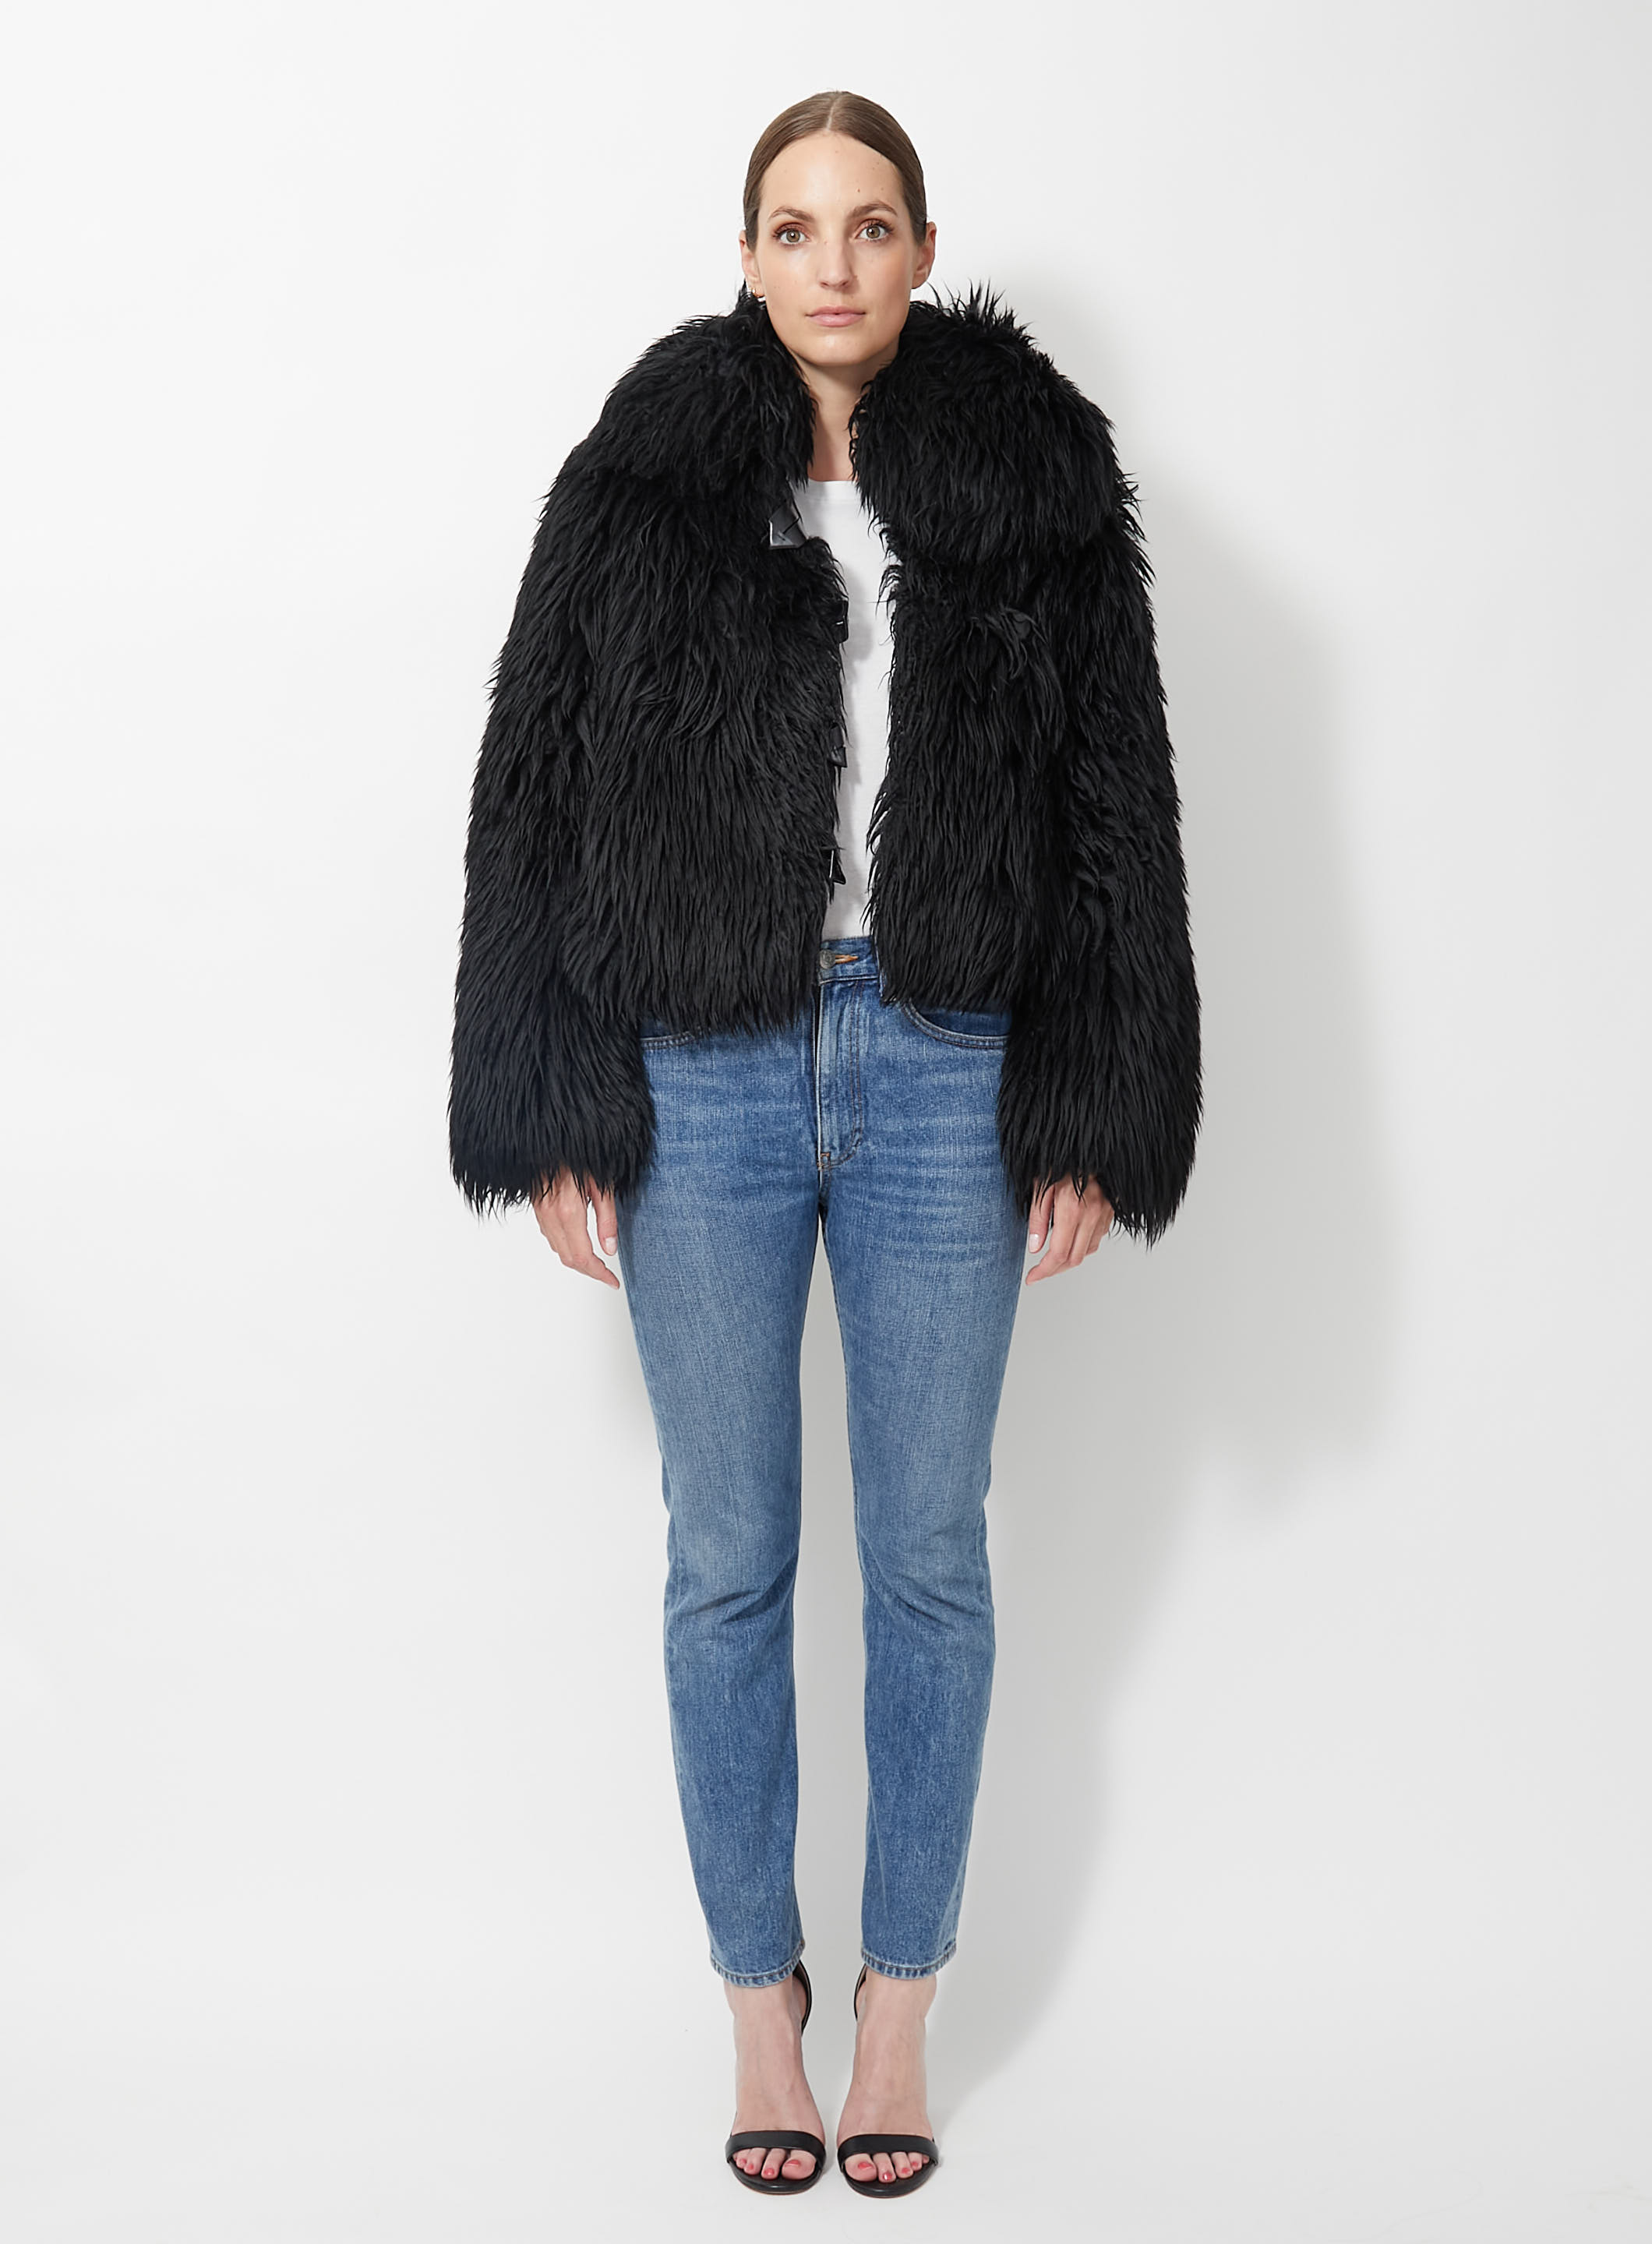 F/W 2015 Cropped Shearling Jacket, Authentic & Vintage